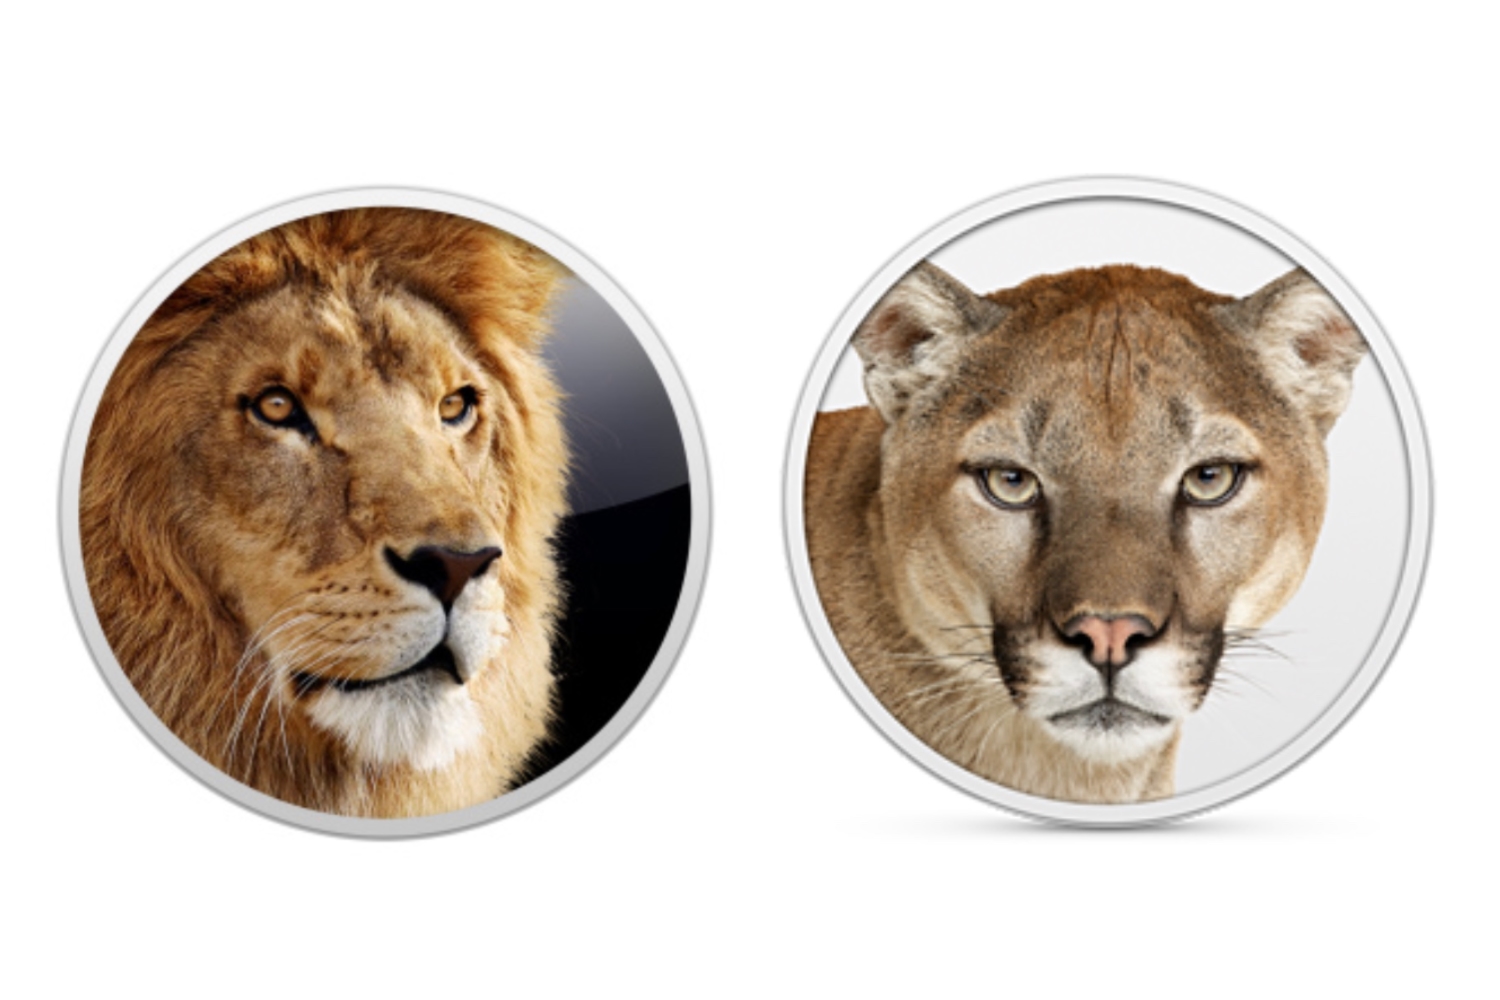 download code for mac os x mountain lion